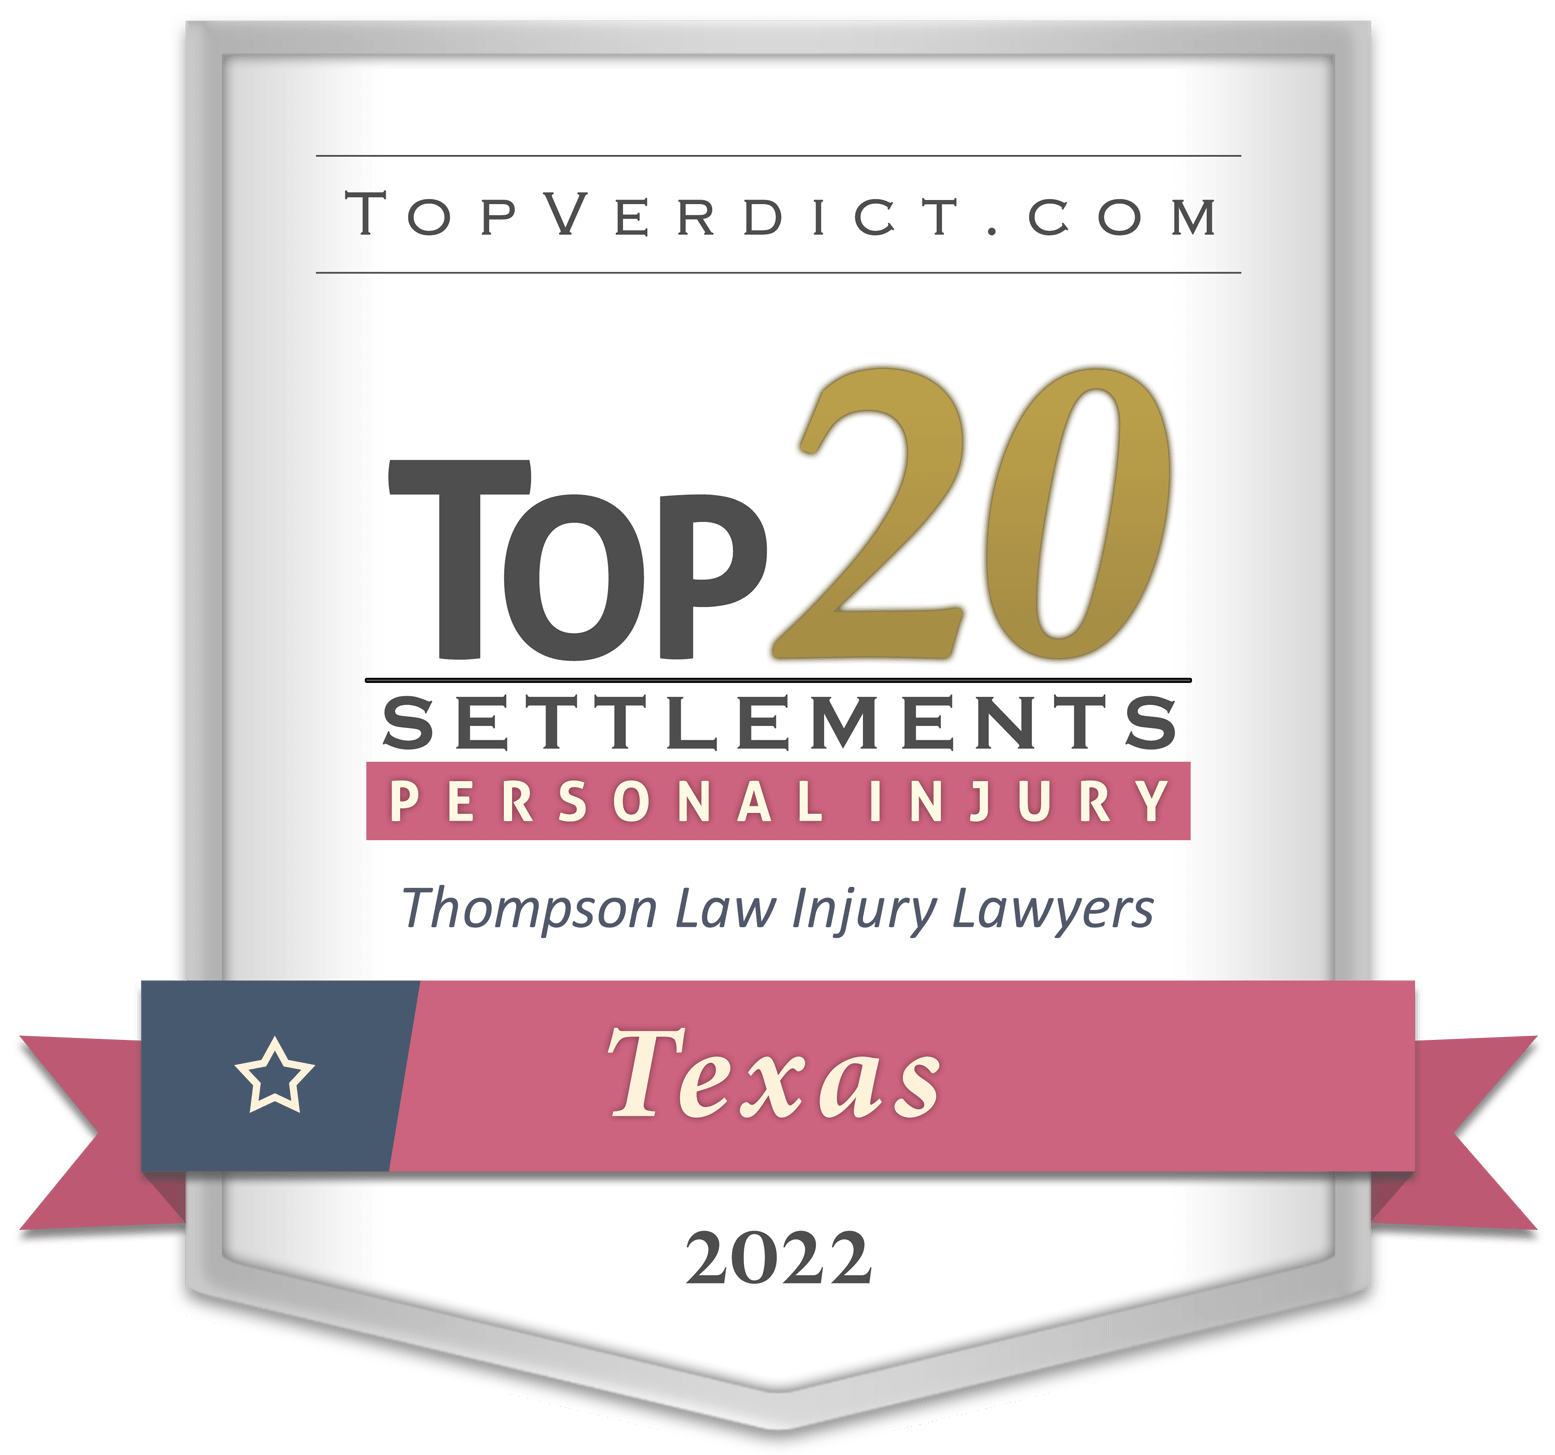 TopVerdict Top 20 personal injury settlements in Texas 2022 badge - Carrollton Personal Injury Law Firm